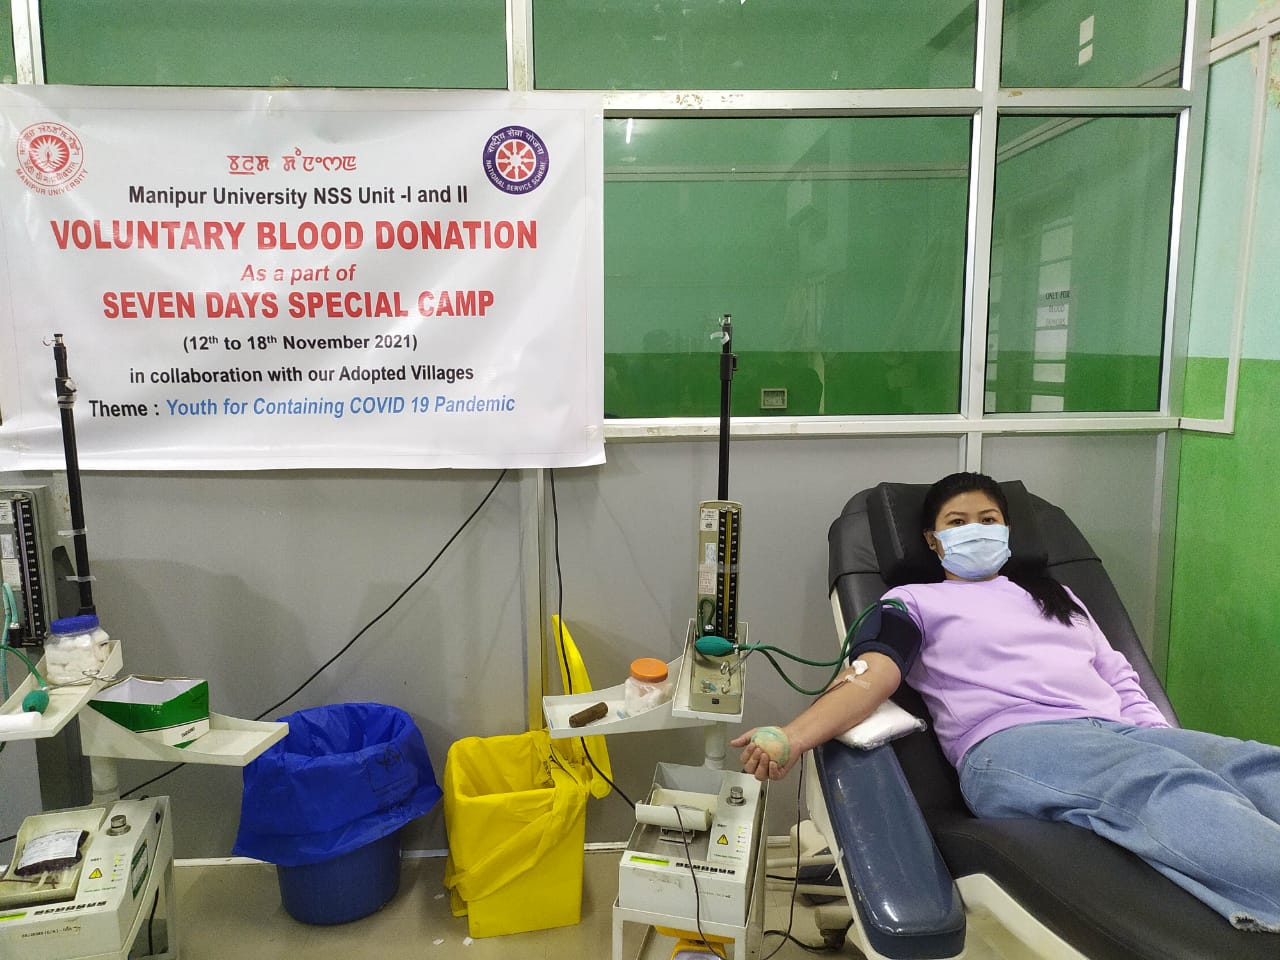 MU NSS Unit I and II organizes one-day Voluntary Blood Donation as a part of Seven Days Special Camp at JNIMS 15/11/2021